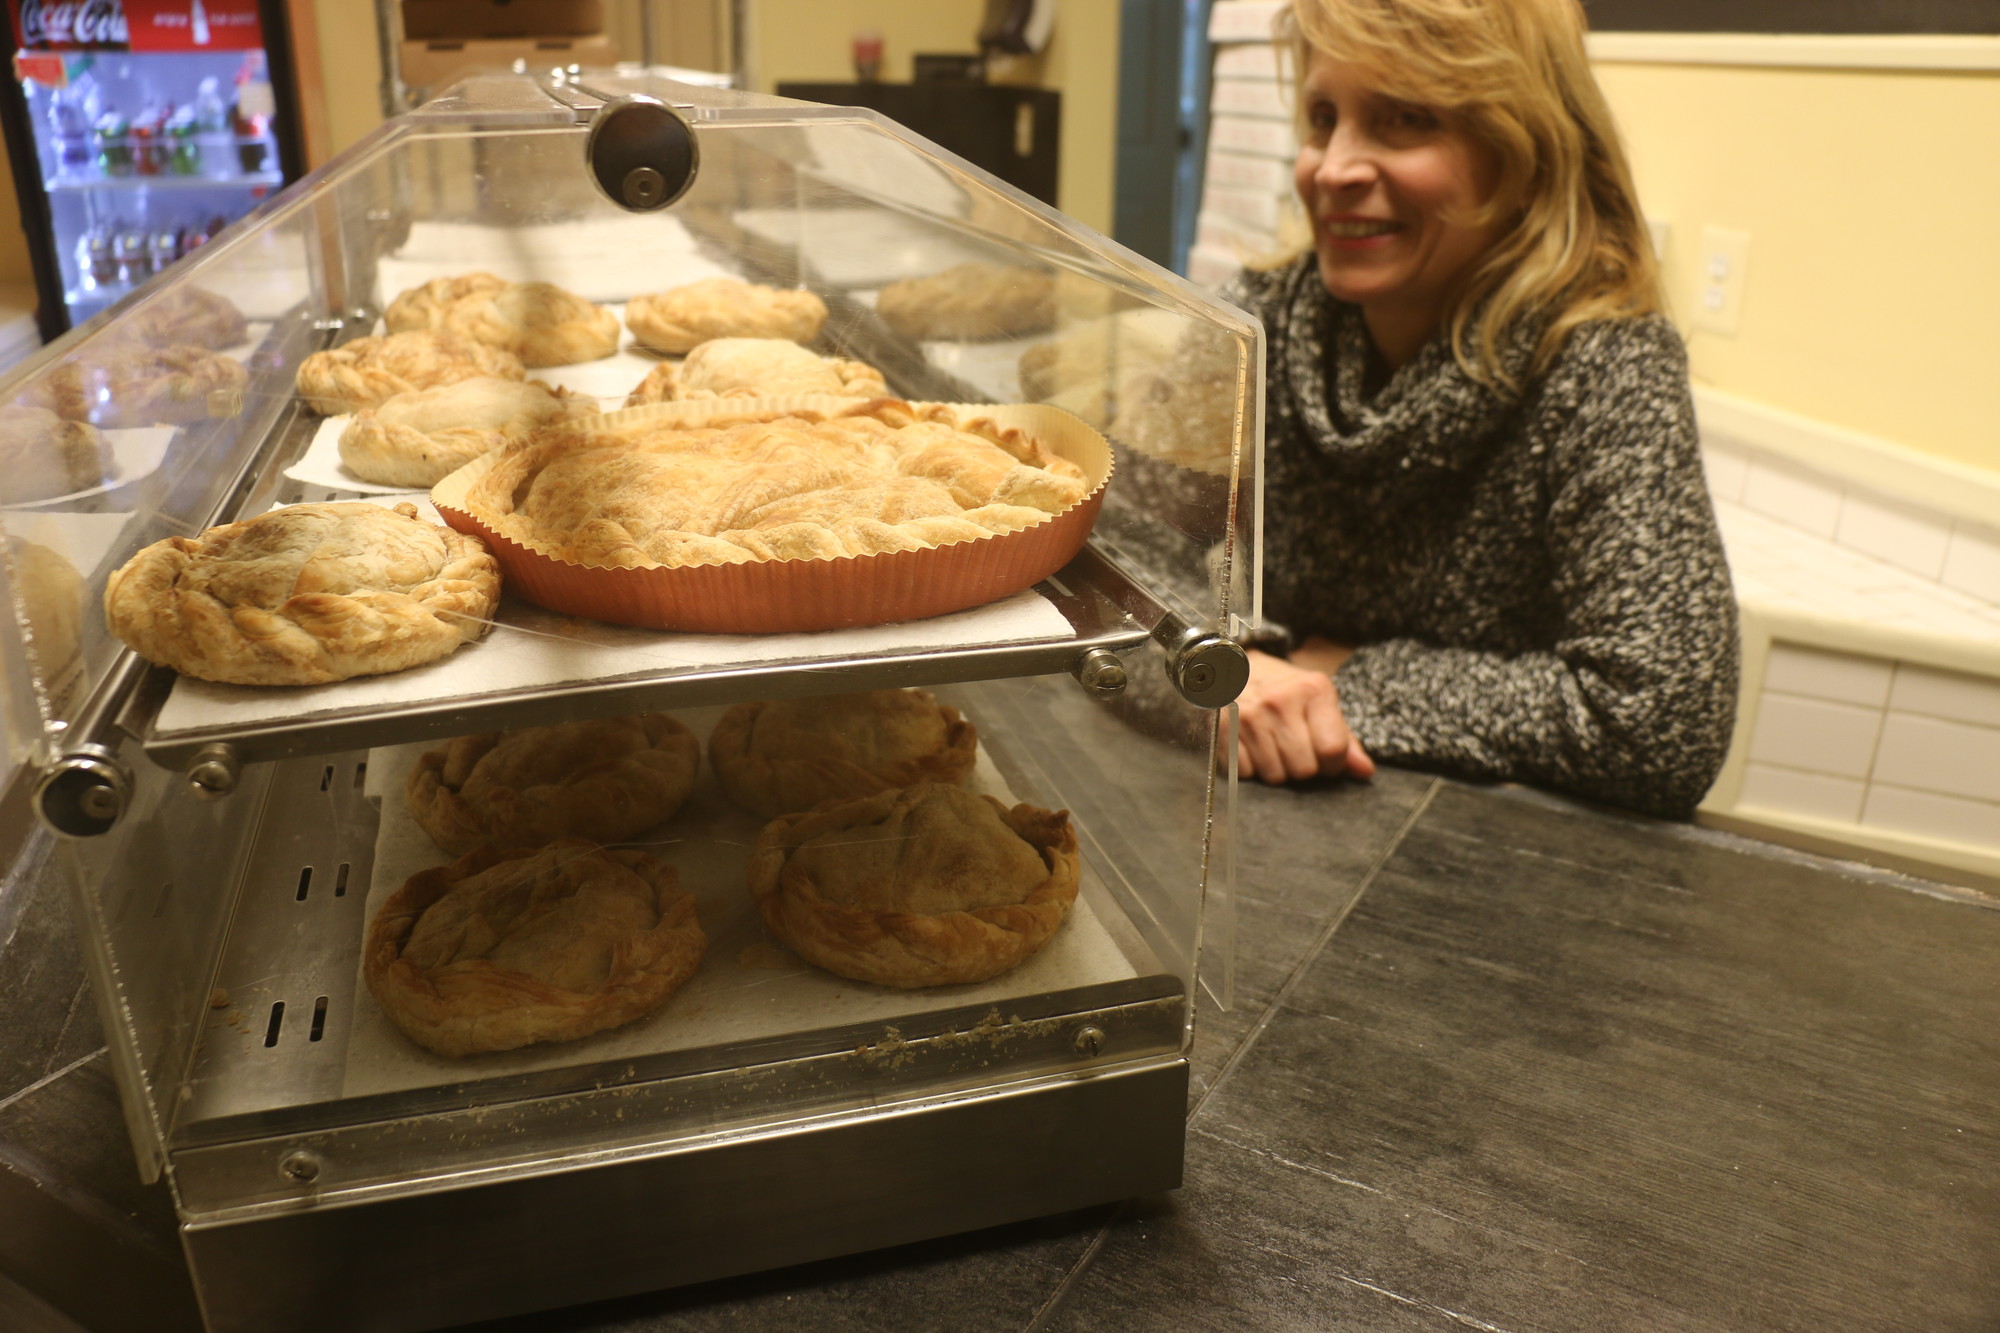 The Greek Pie Factory owner, Thomai, behind the shop’s counter, where a variety of sweet and savory pies are displayed.